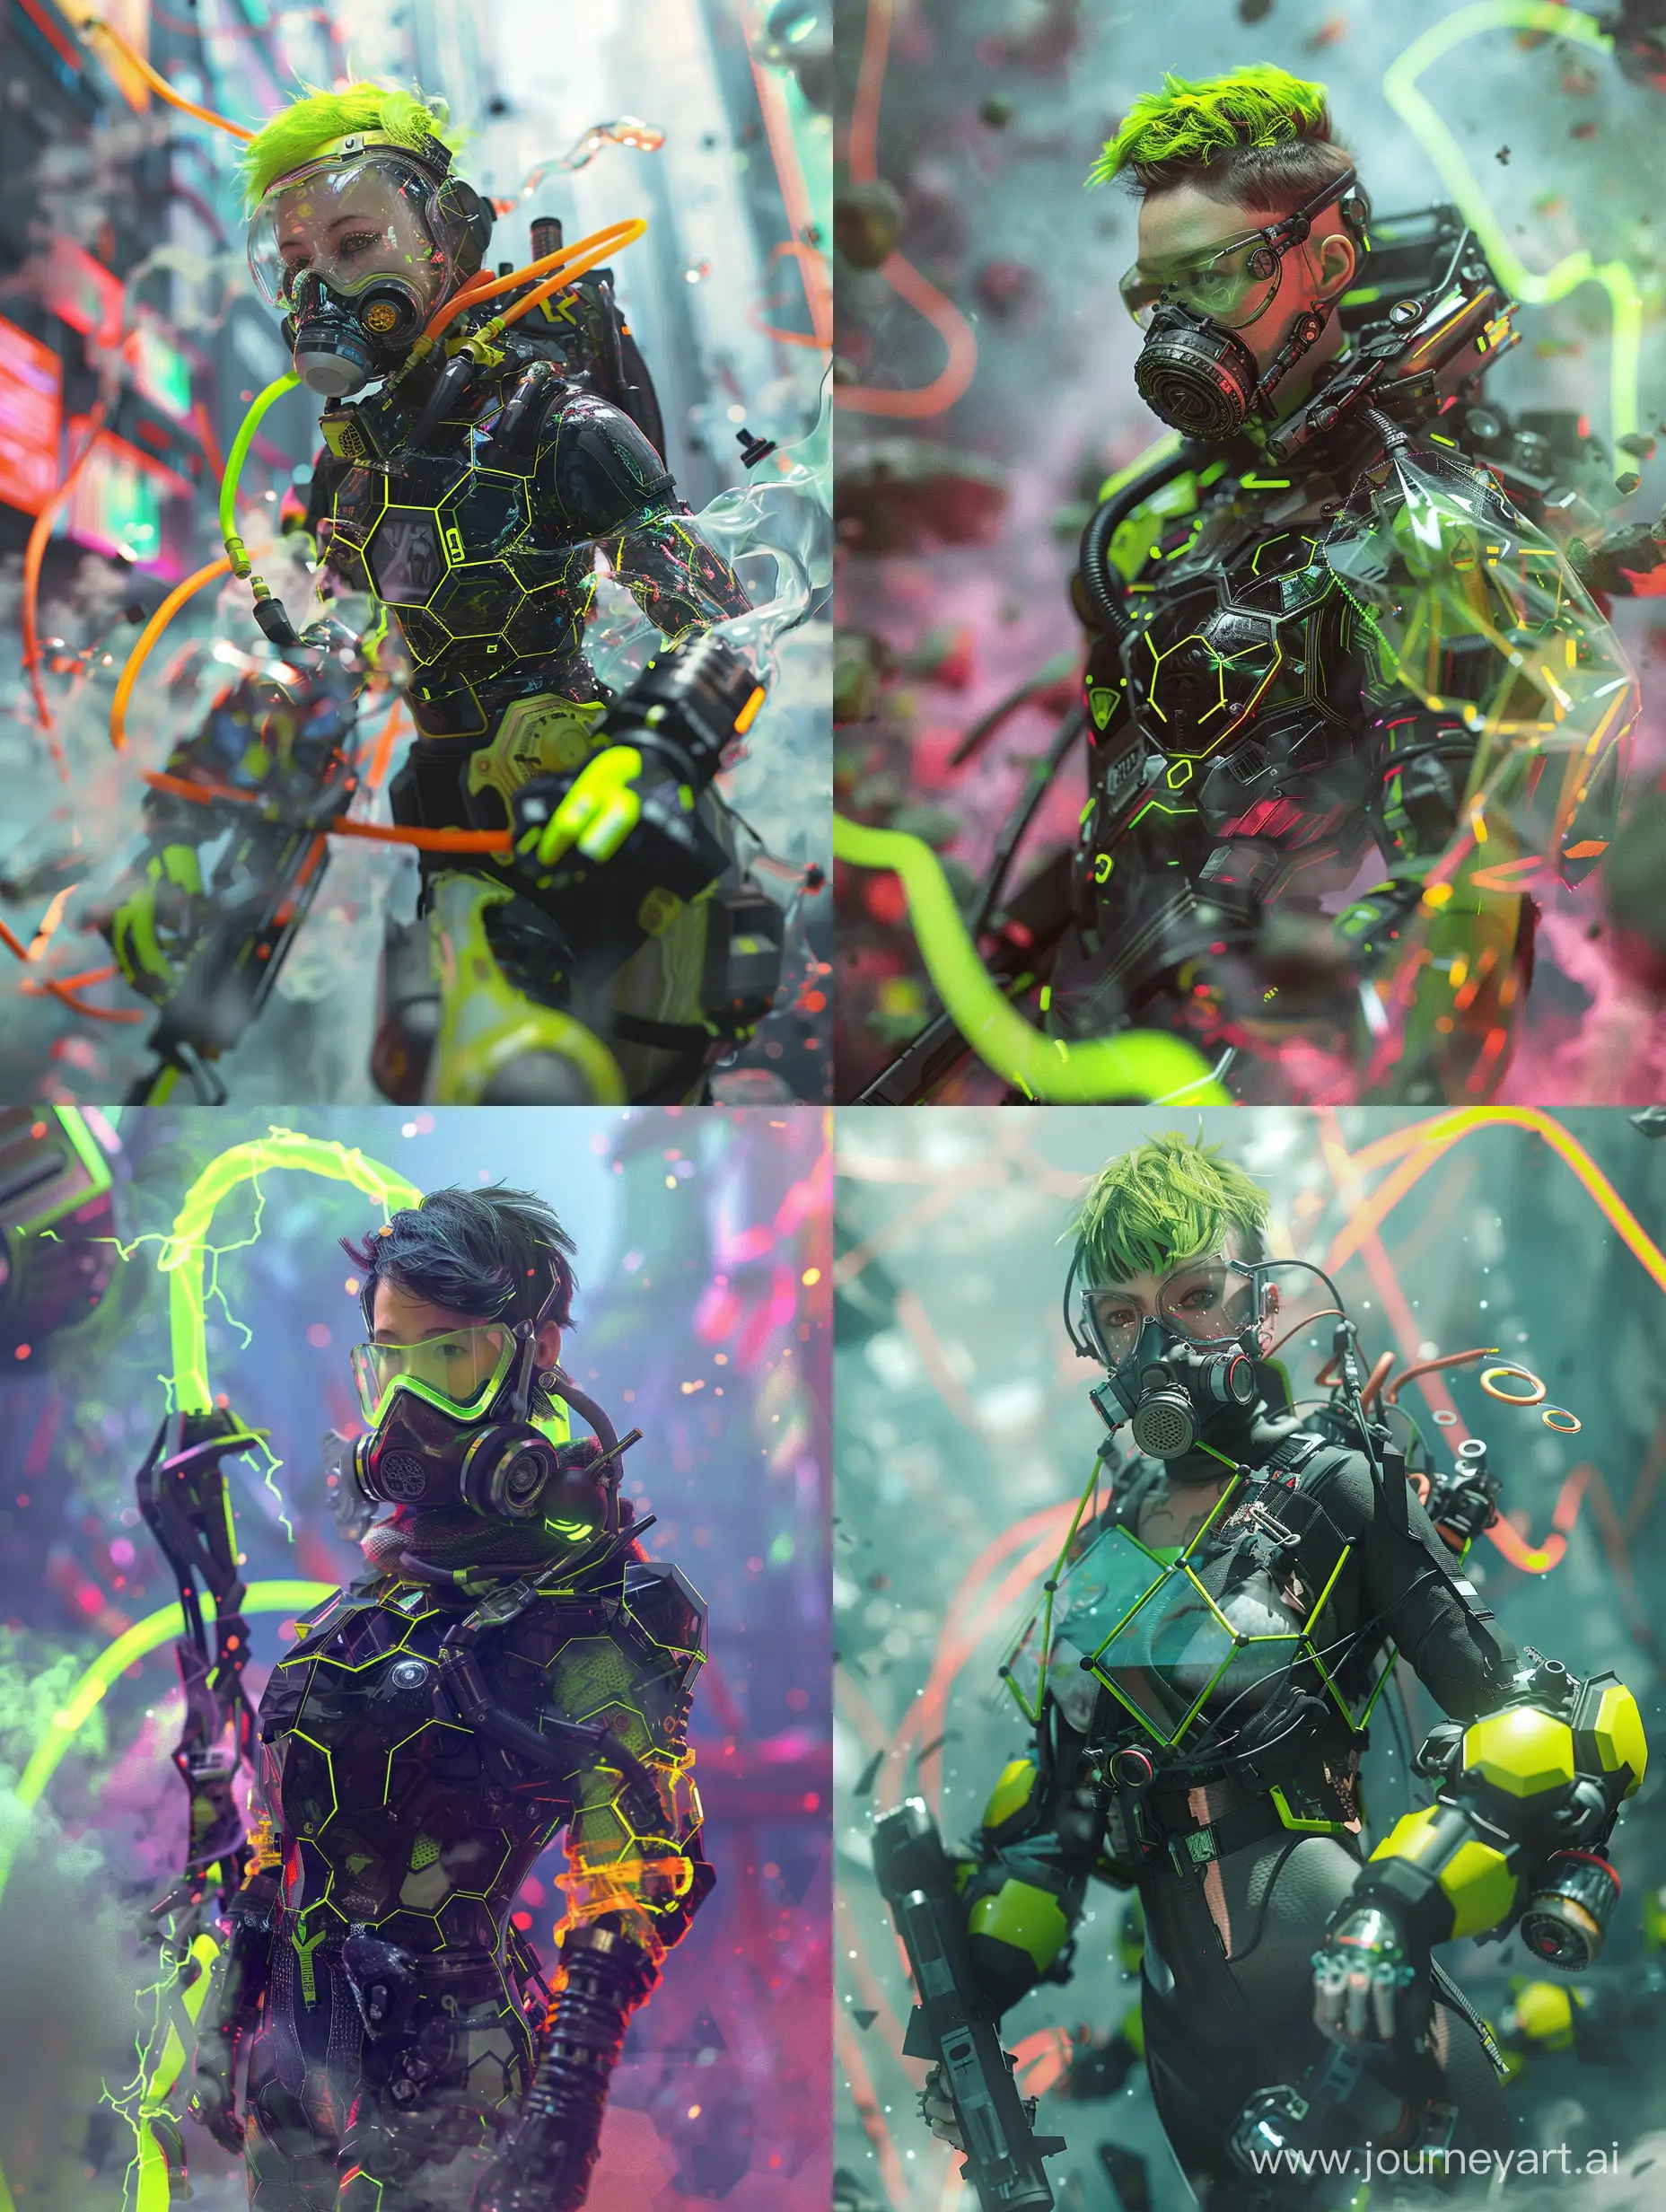 a  super high quality,high definition, high resolution, high detail cinematic worm view dynamic scene where a cyberpunk female with face gas mask and lime short hair wearing glass sheeted hexagonal neon armour carrying an aneurysm energy like weapon amidst a vibrant volumetric completely neonatal vibrant colourful cyberpunk city ,The armor she is wearing is partially transparent, revealing the hexagonal black and lime armor which is adorned with intricate detailing, seamlessly integrating advanced technological enhancements on the armour. Volumetric lighting casts dramatic shadows, enhancing the ultra-realistic cinematography and creating a contrast between the female and the environment. The scene is full of details, such as misty smoke  and other oddities as well as reflections, glows, The scene is rendered in a realistic style, with high definition, high resolution, and high detail.